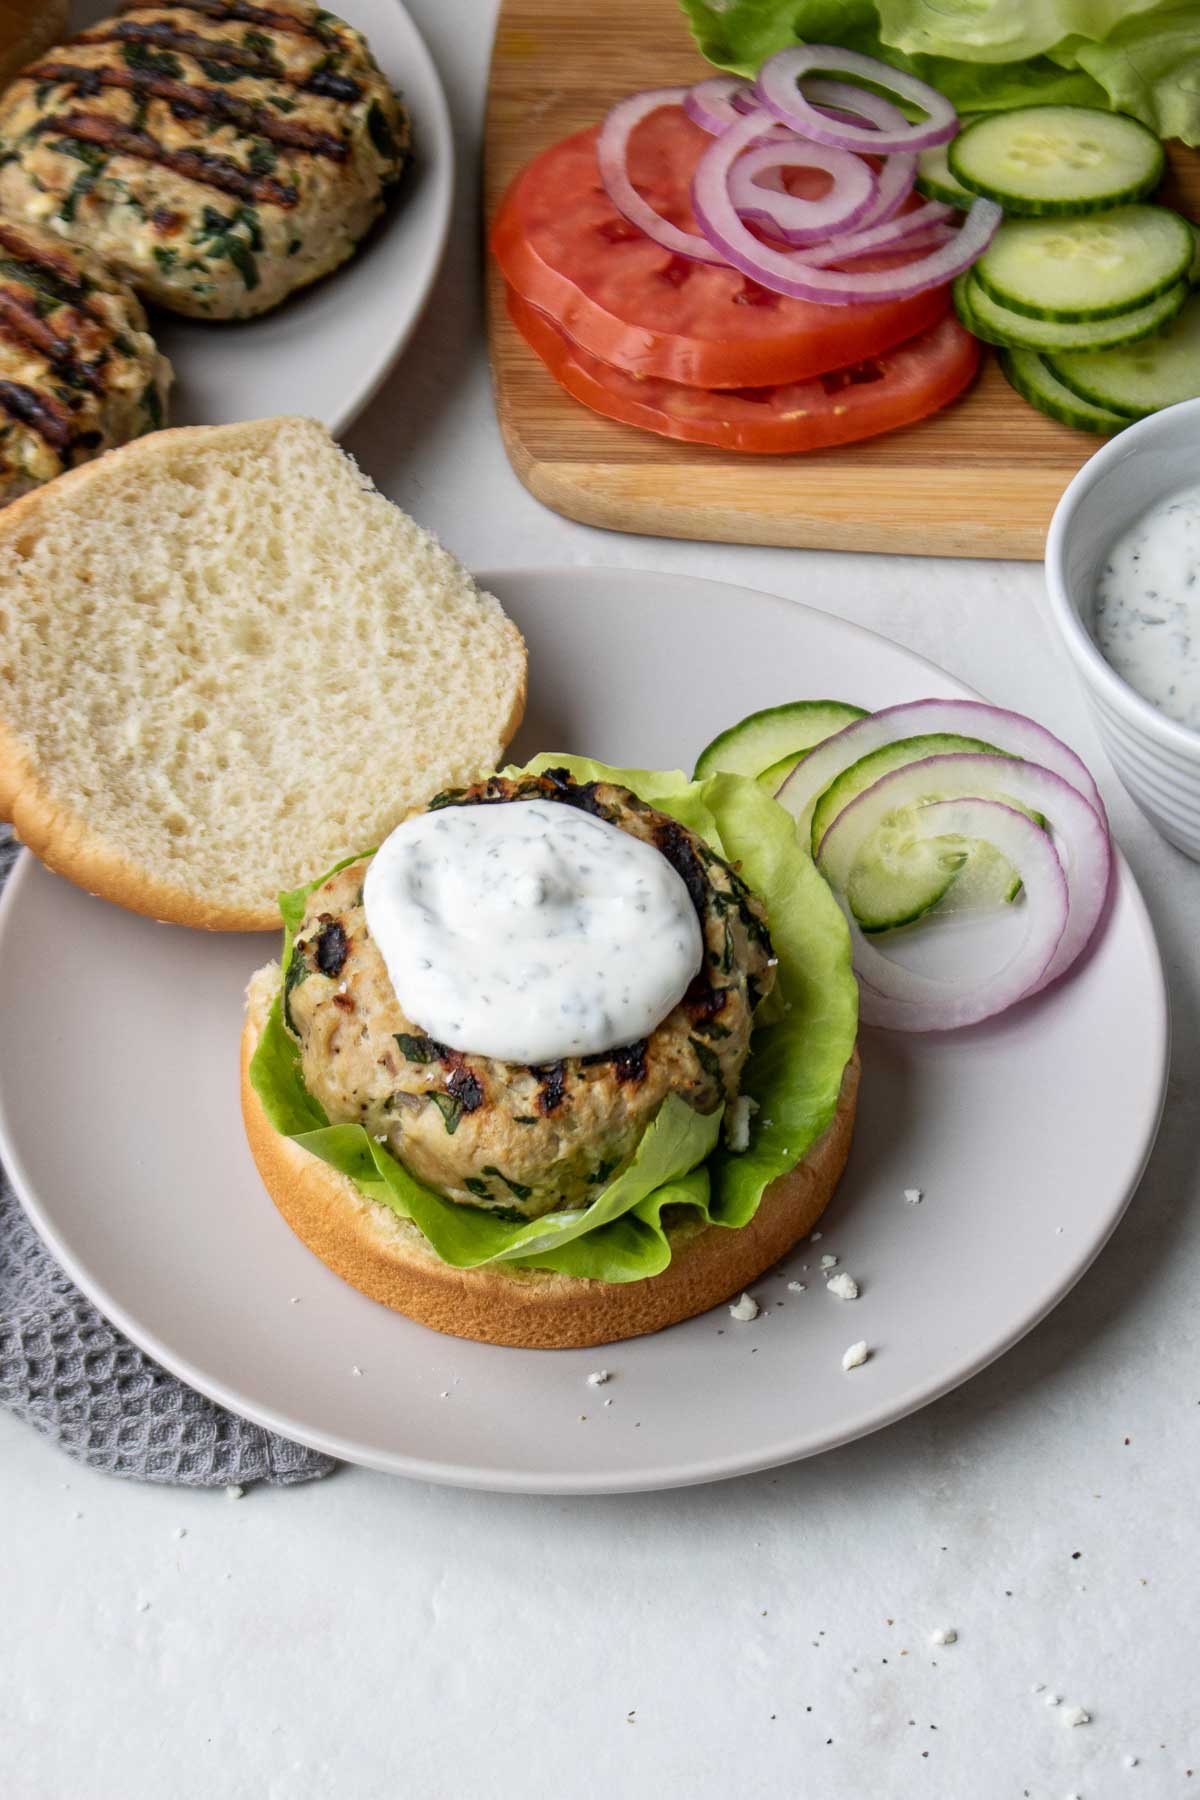 Cooked turkey burgers with spinach and feta being prepared with toppings on a cutting board.